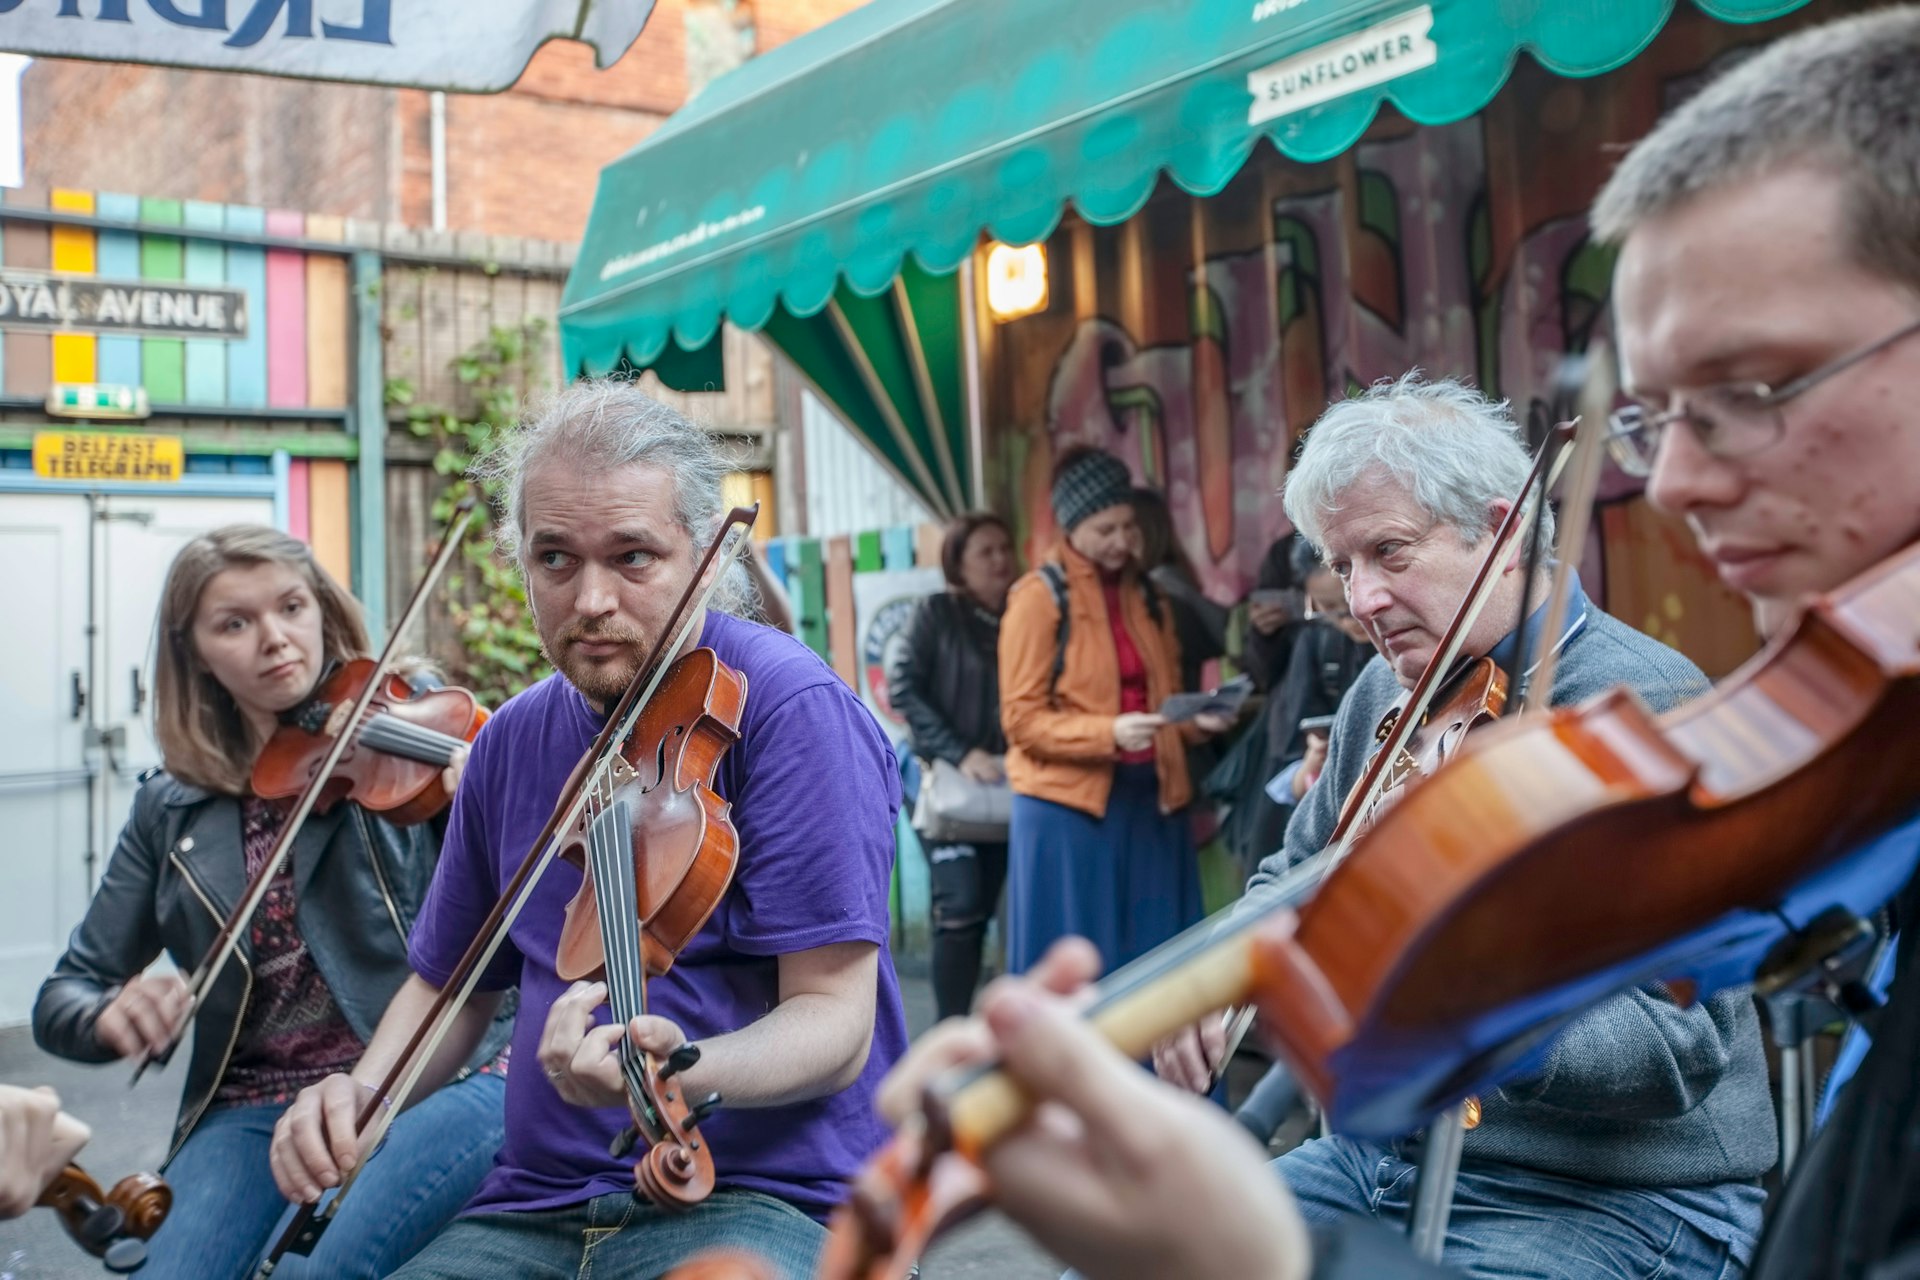 Traditional fiddle players perform an impromptu jam at the Sunflower Public House.